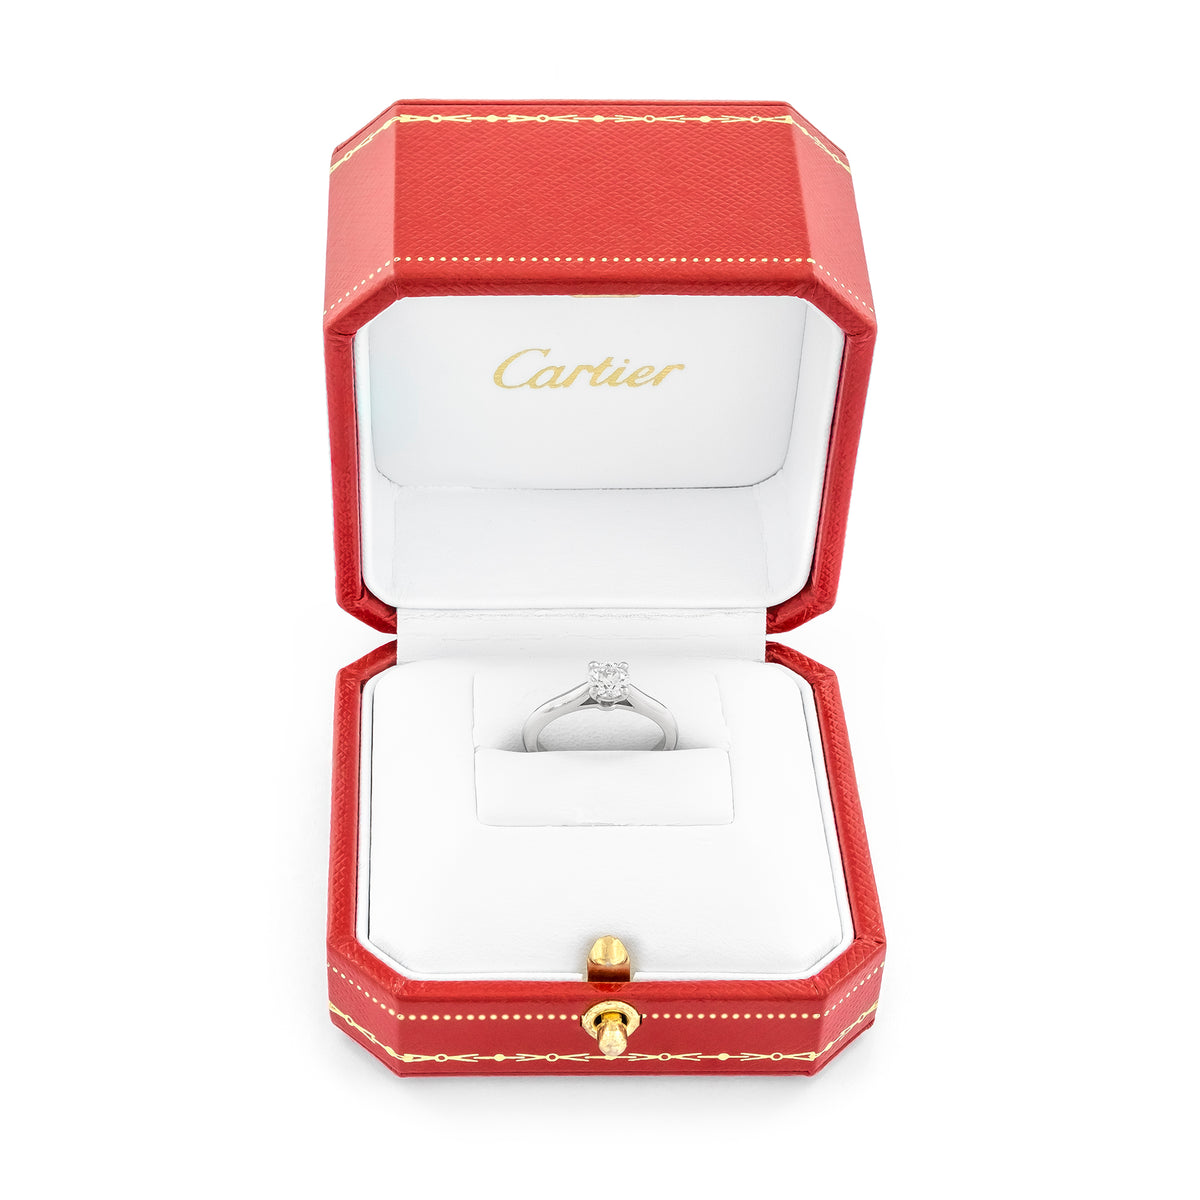 Cartier 0.48ct Diamond Solitaire Engagement Ring